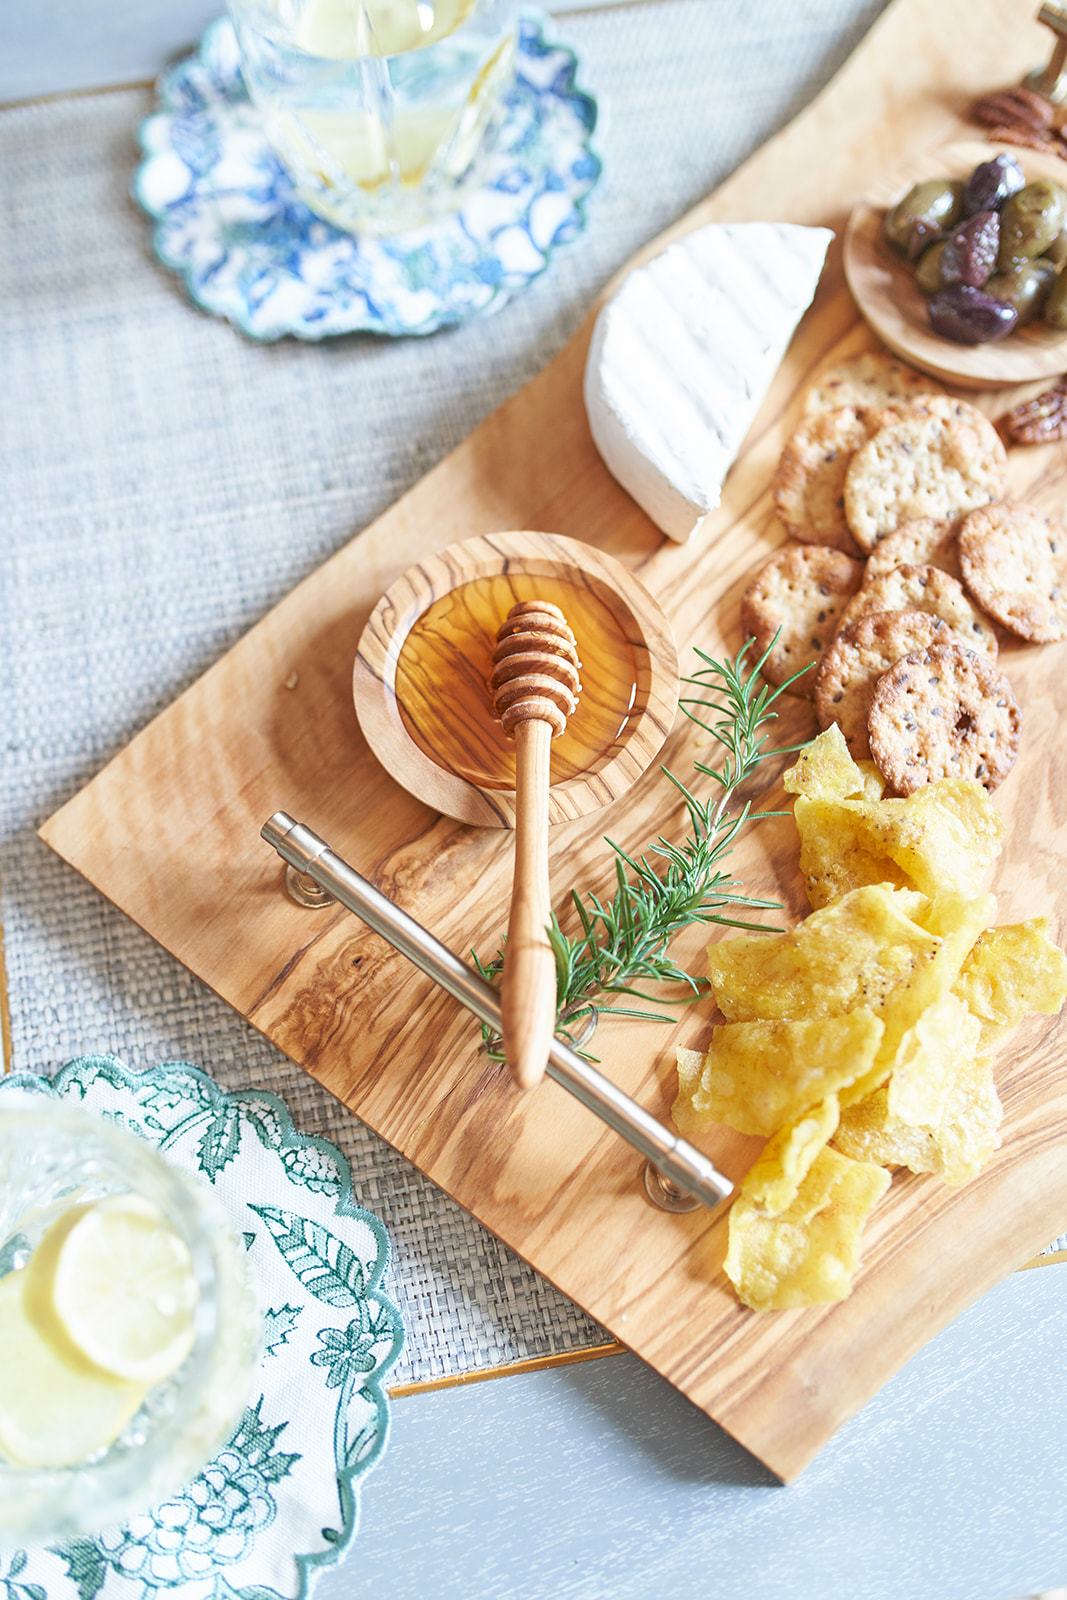 Large Cheese & Charcuterie Board, Olivewood